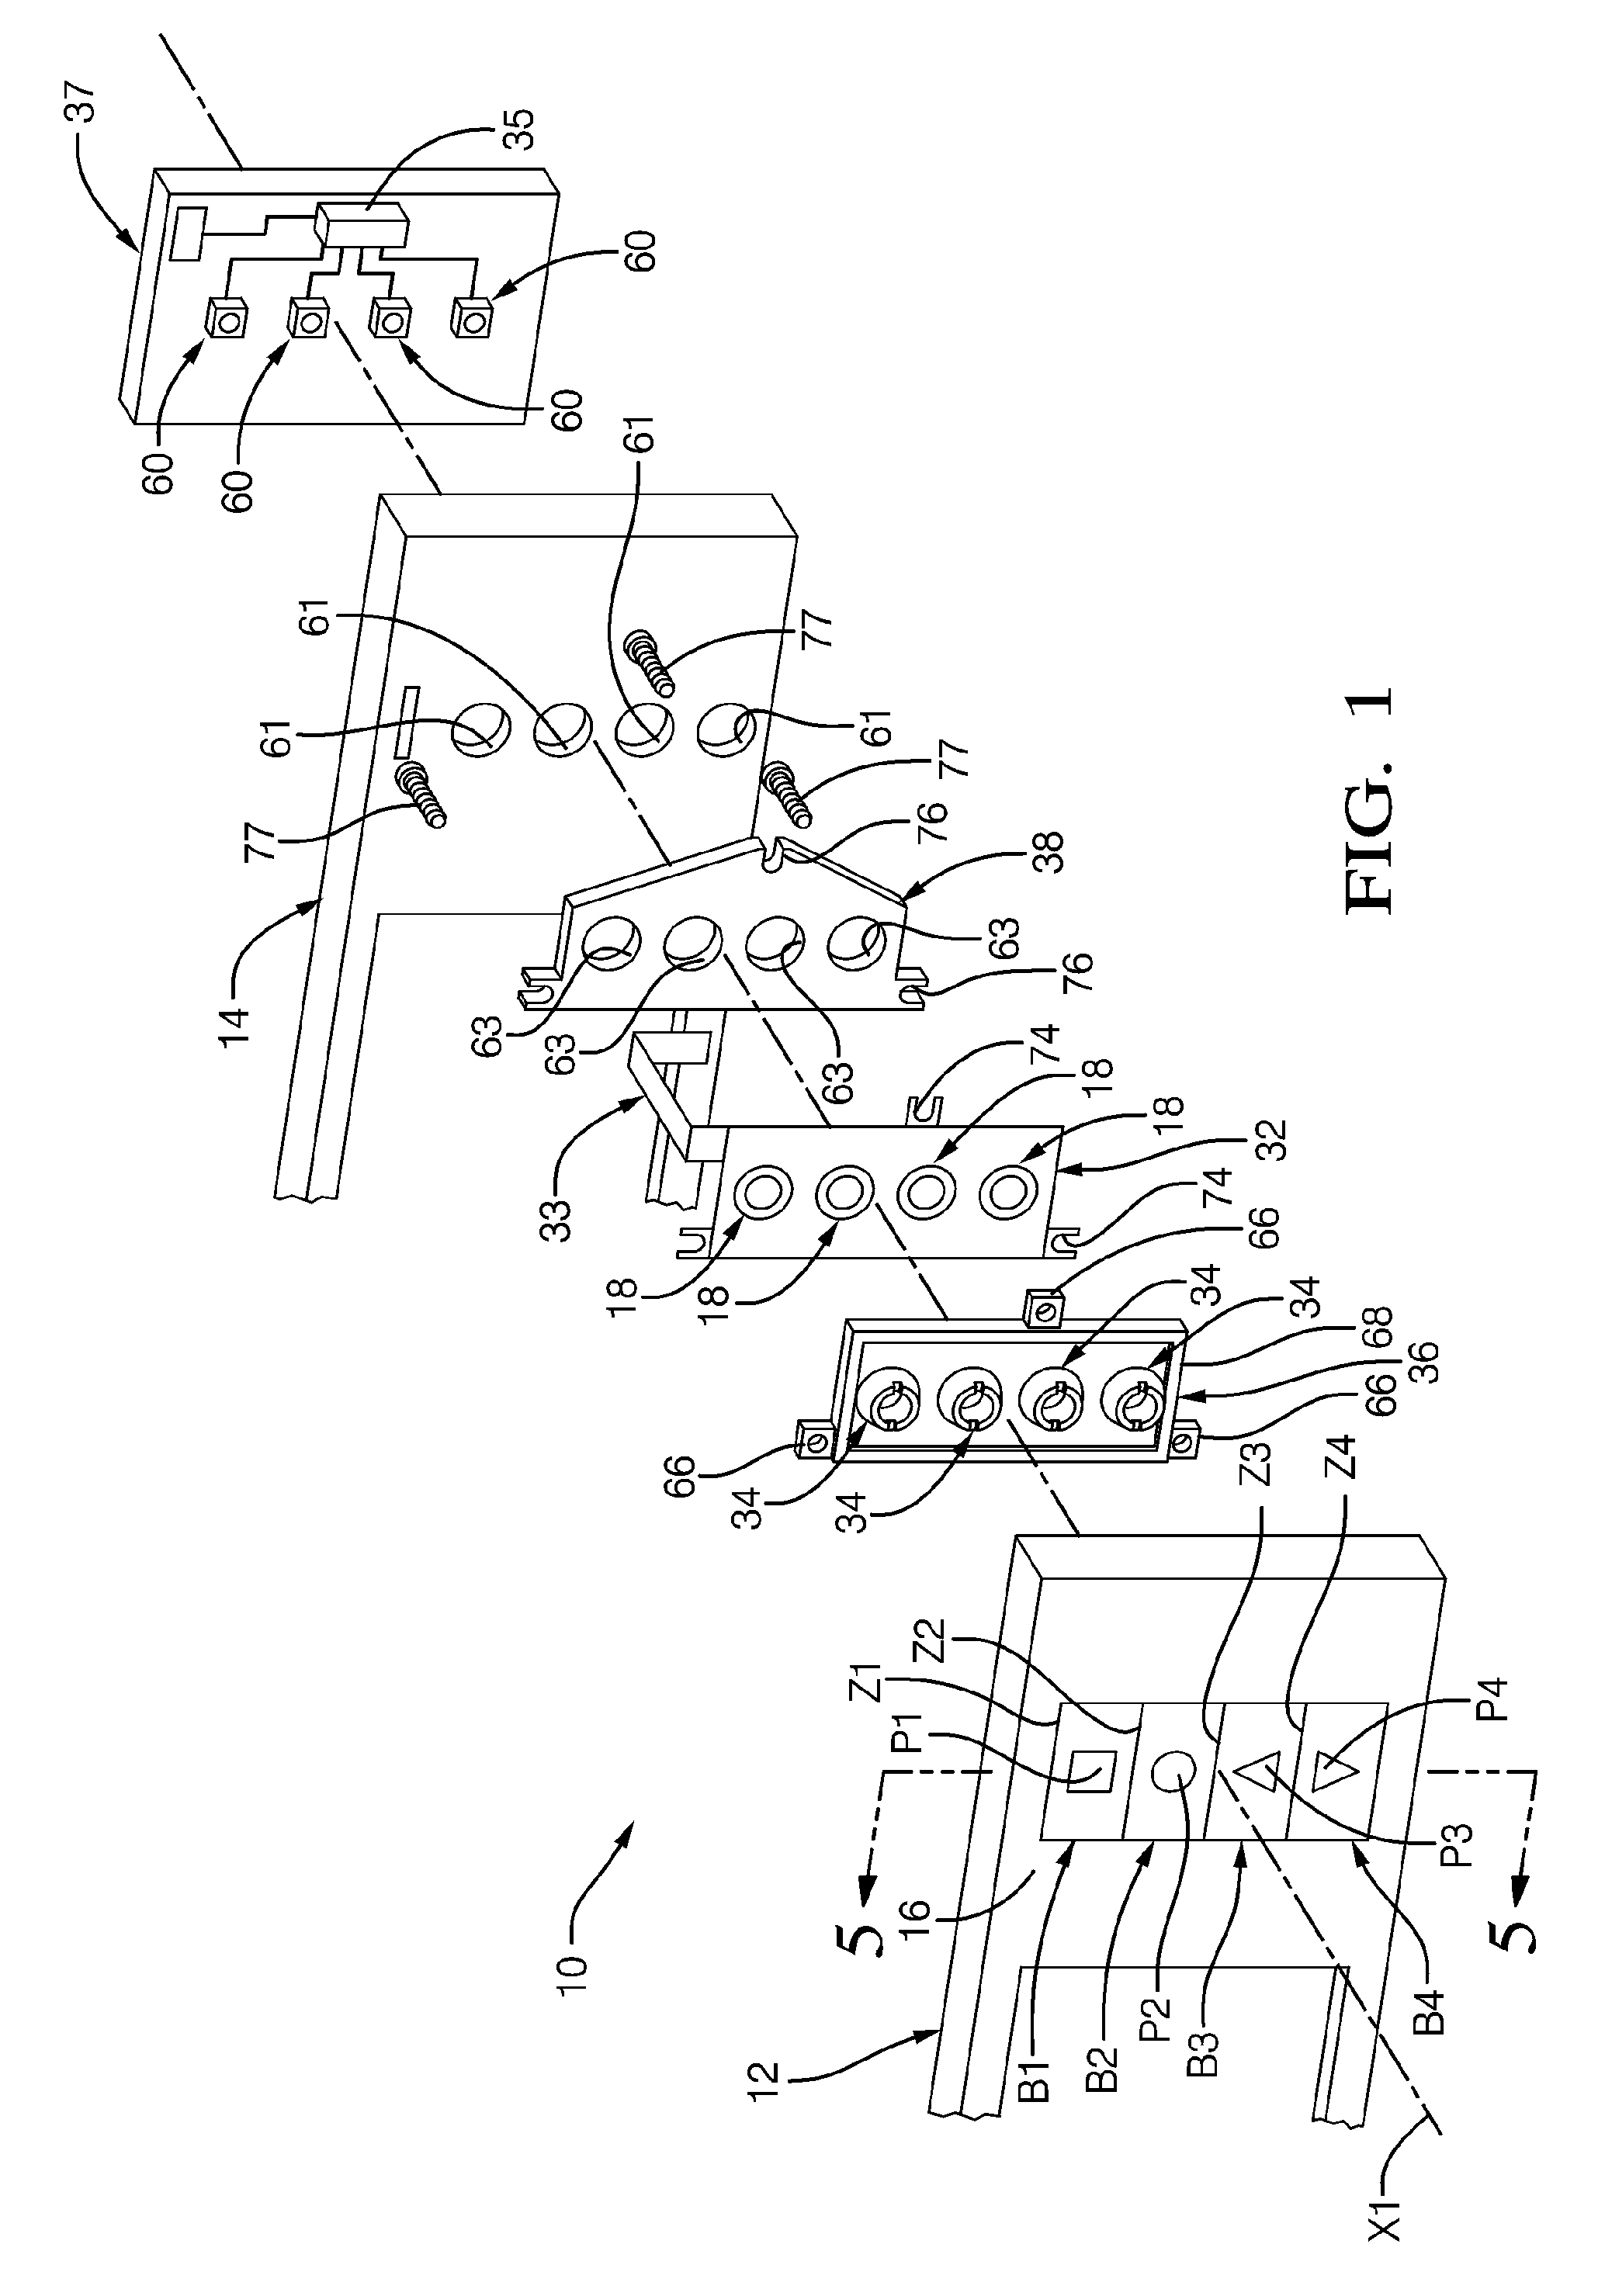 Control panel comprising resistive keys and spacers